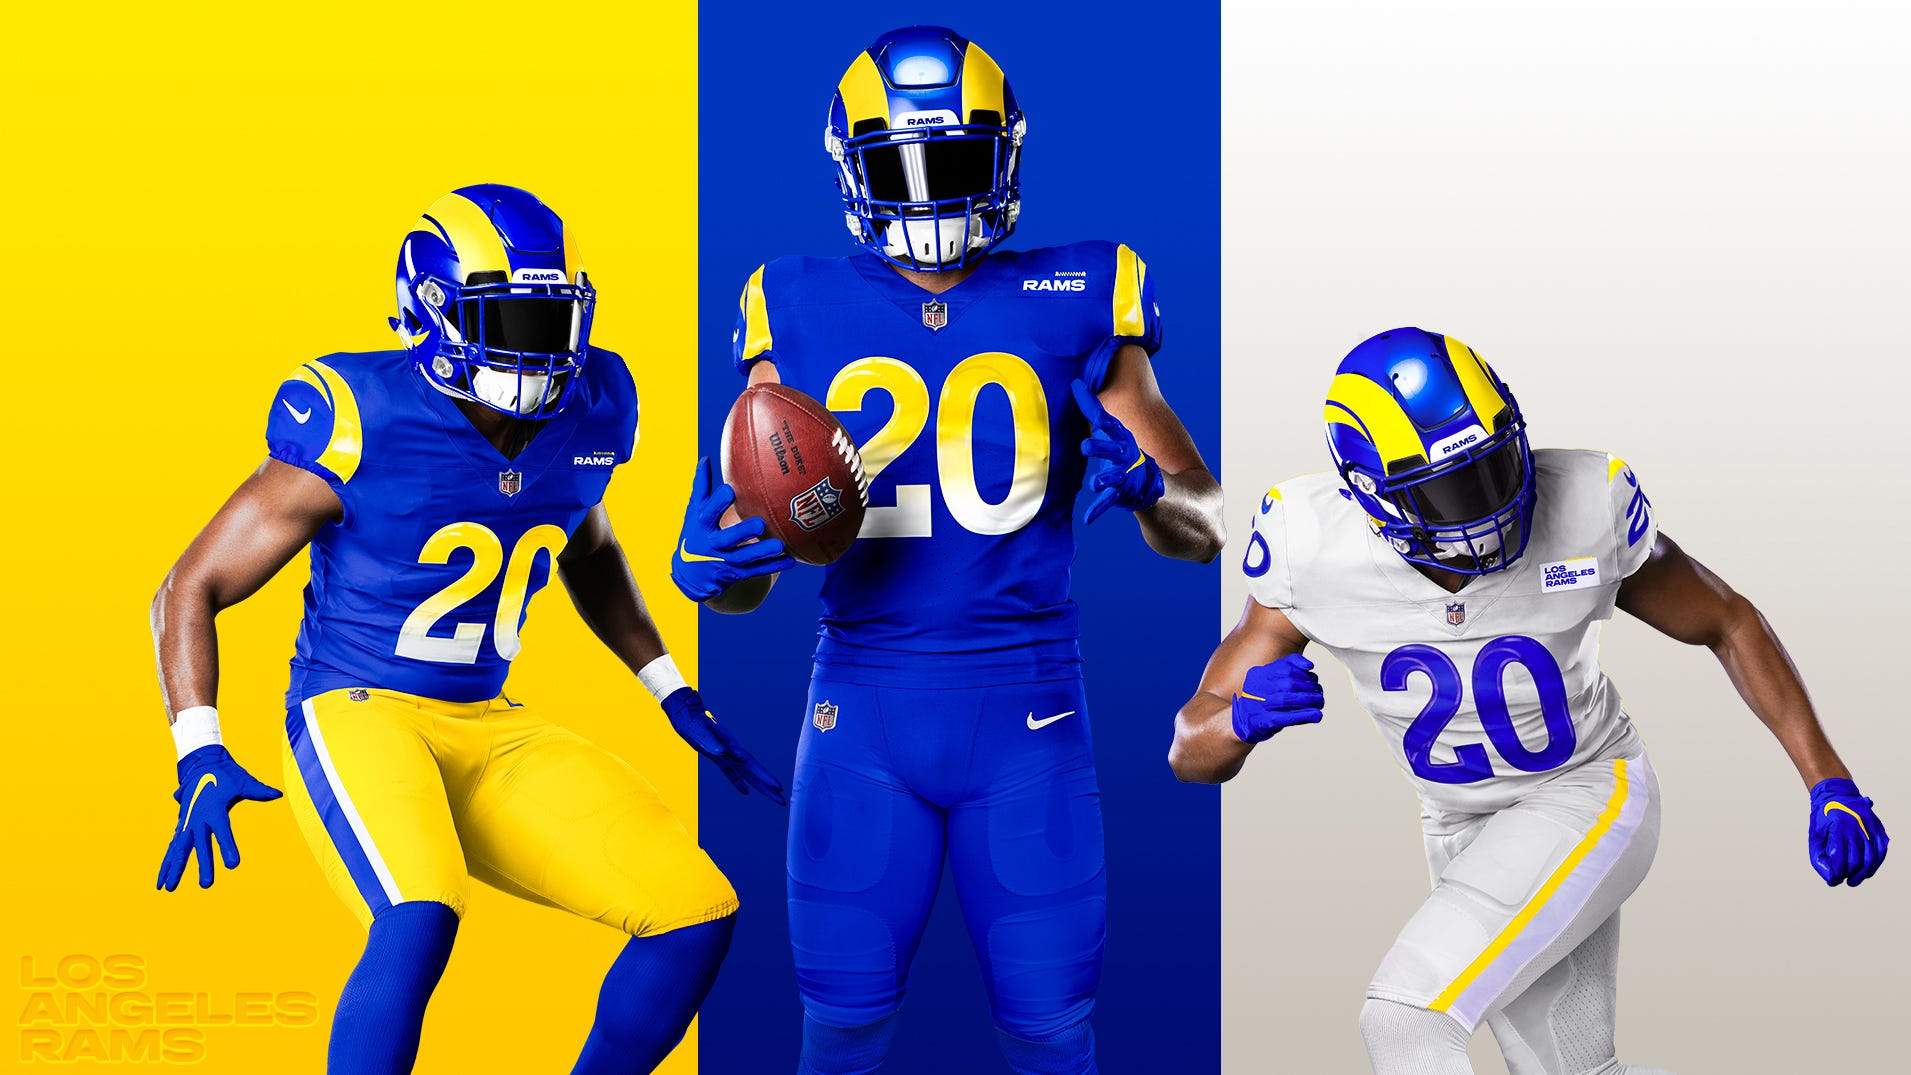 Los Angeles Rams' new uniforms Jersey redesign unveiled in new photos